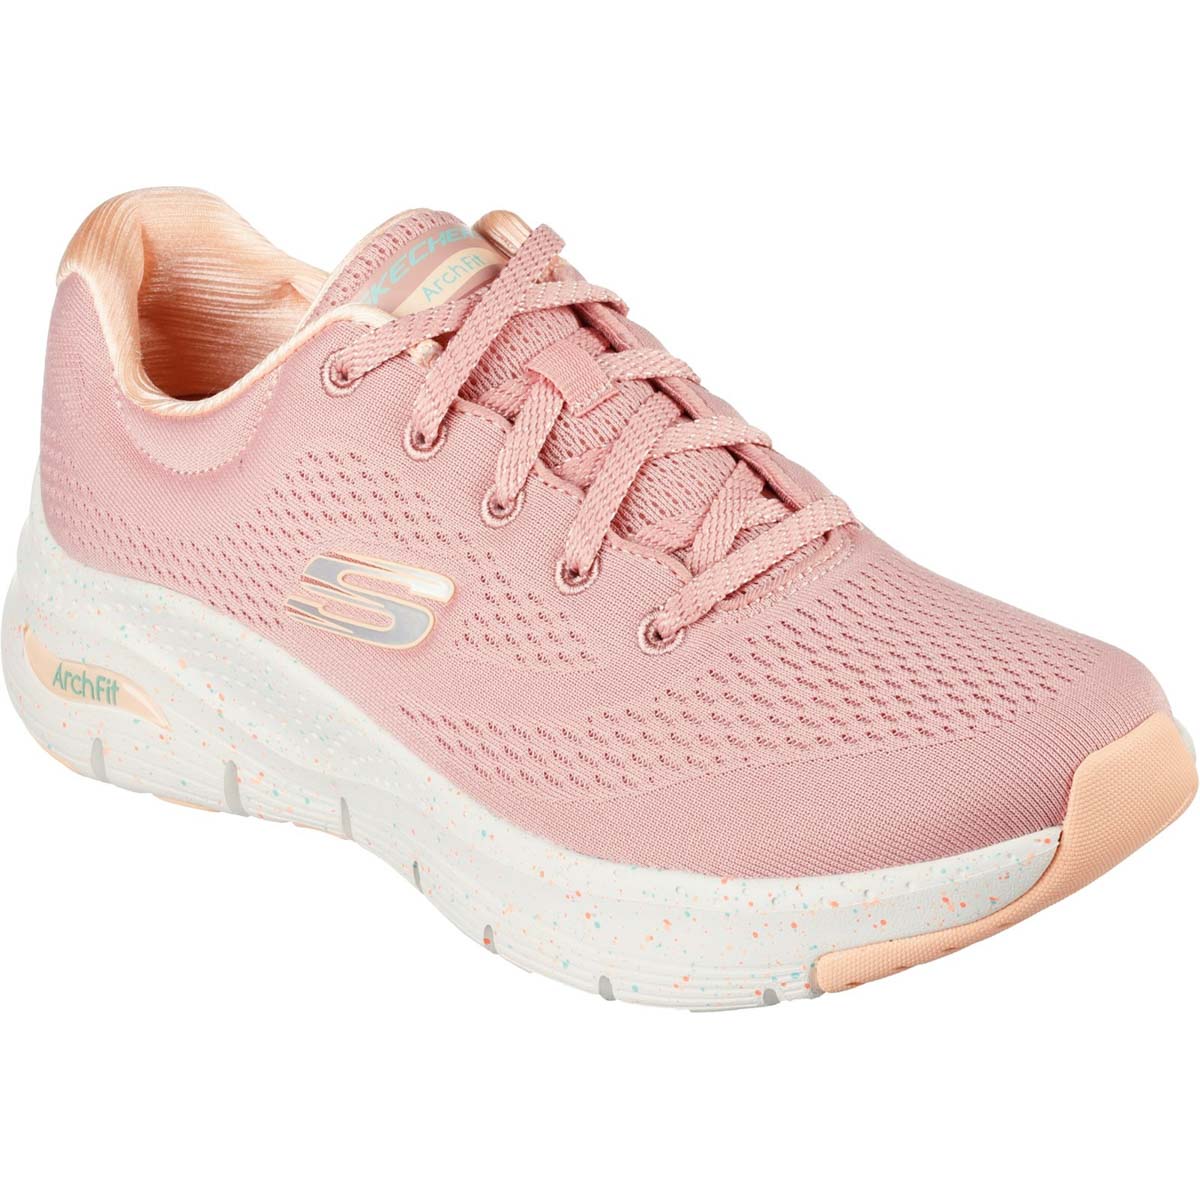 Skechers Arch Fit Freckle Me Pink Womens Trainers 149566 In Size 6 In Plain Pink